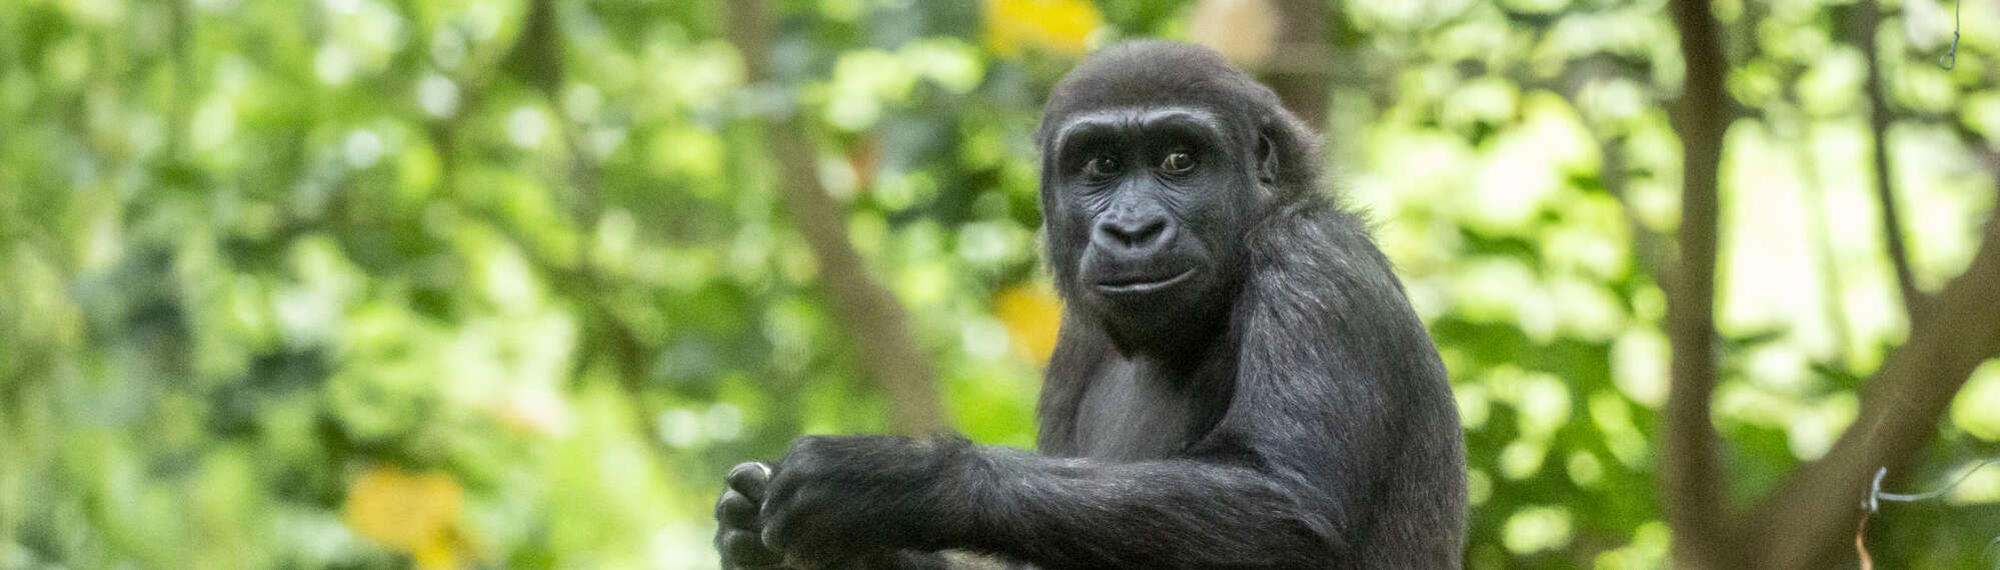 Young gorilla staring to the side of the camera with hands in front, with trees in the background